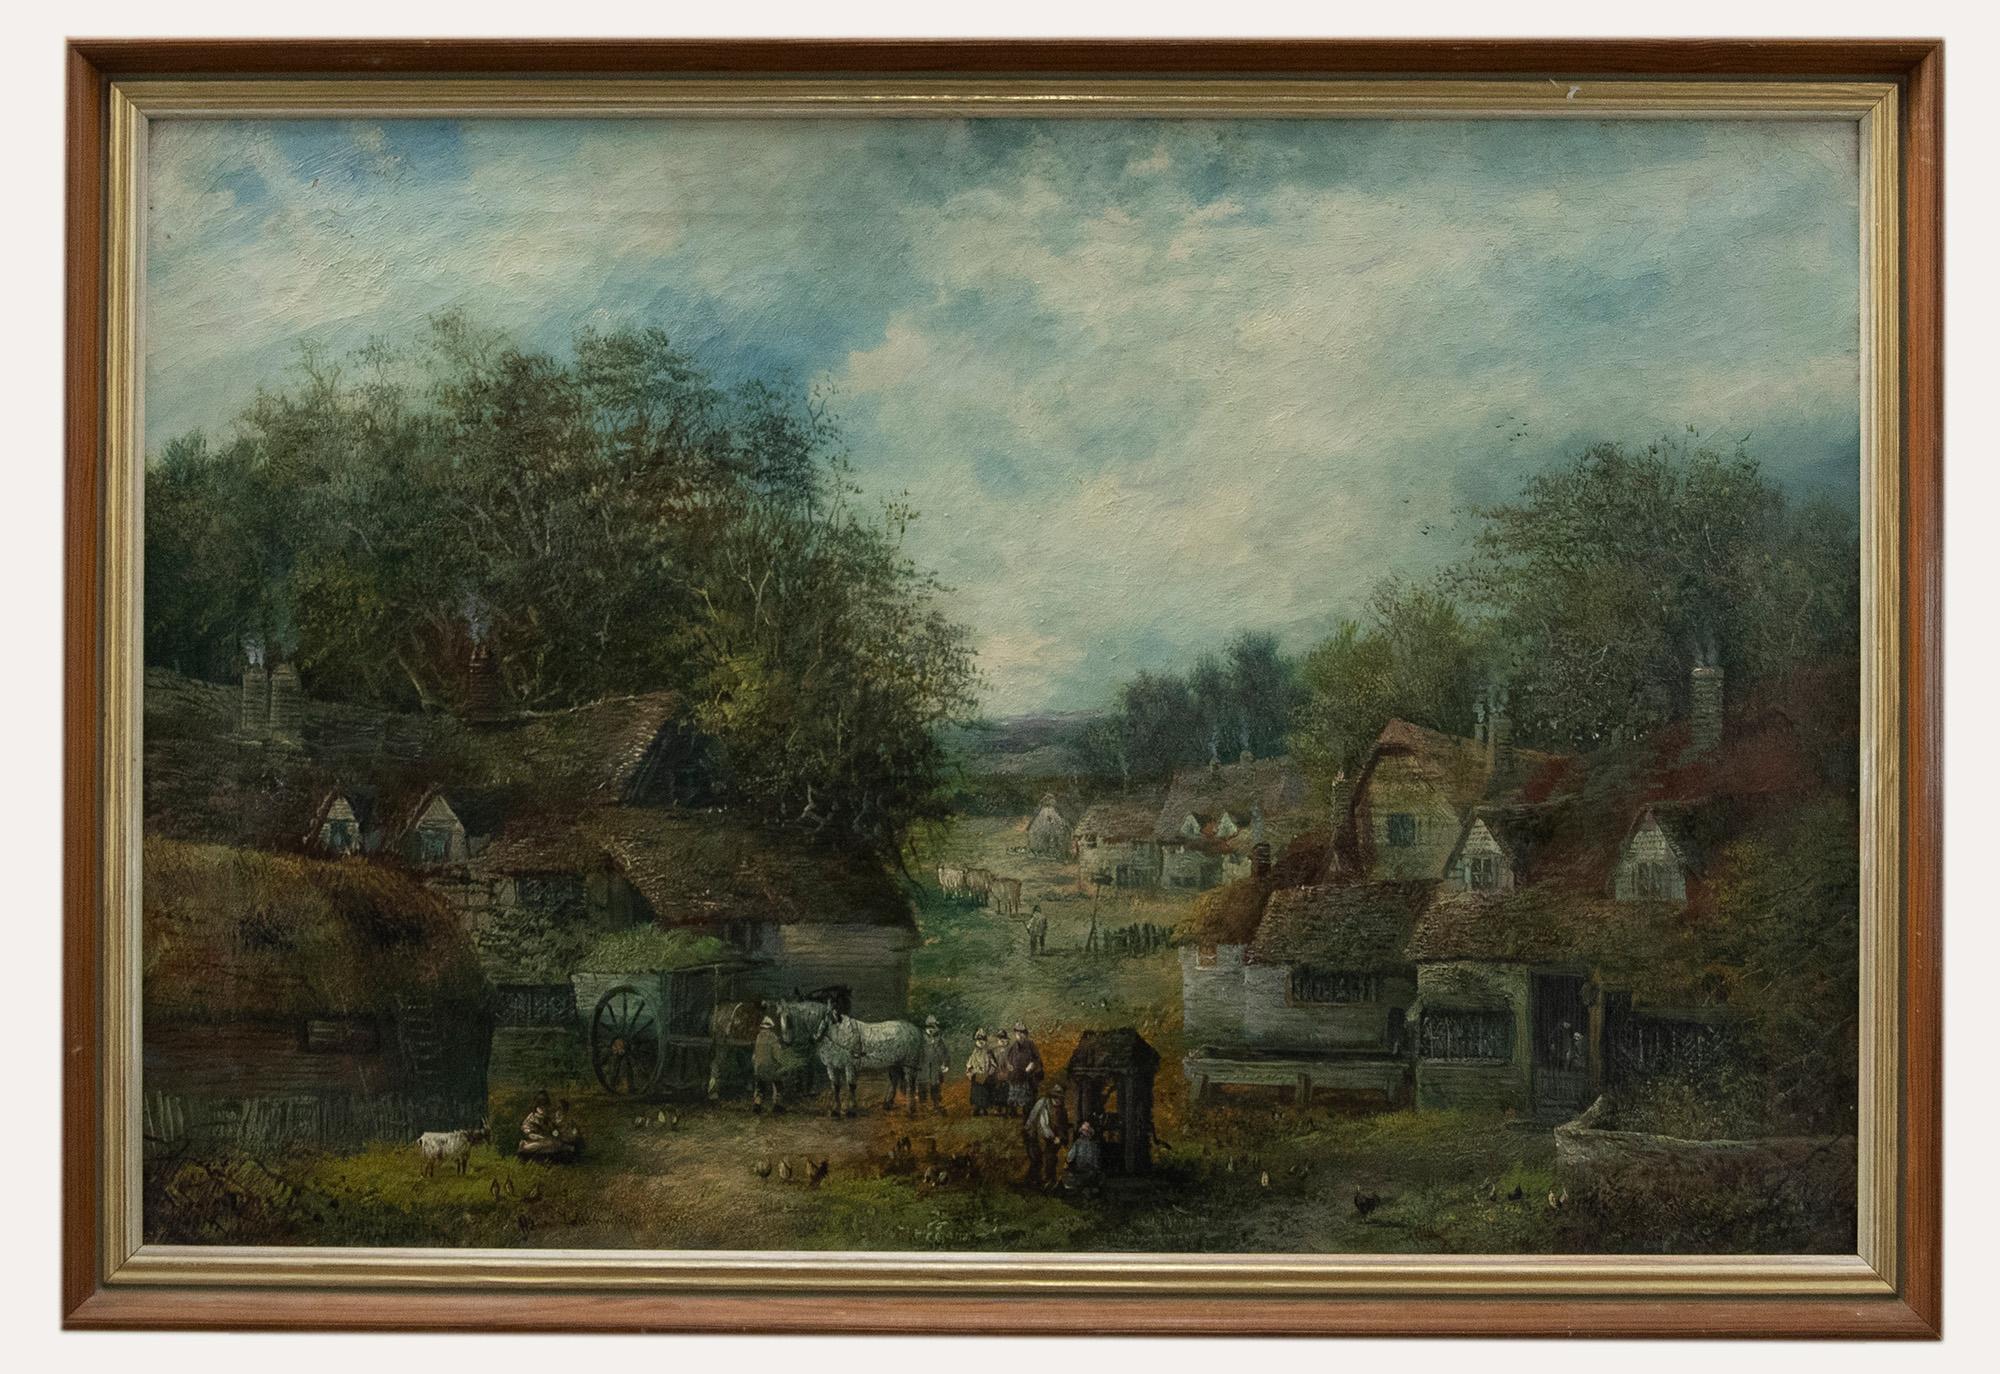 Unknown Landscape Painting - Early 20th Century Oil - The Village